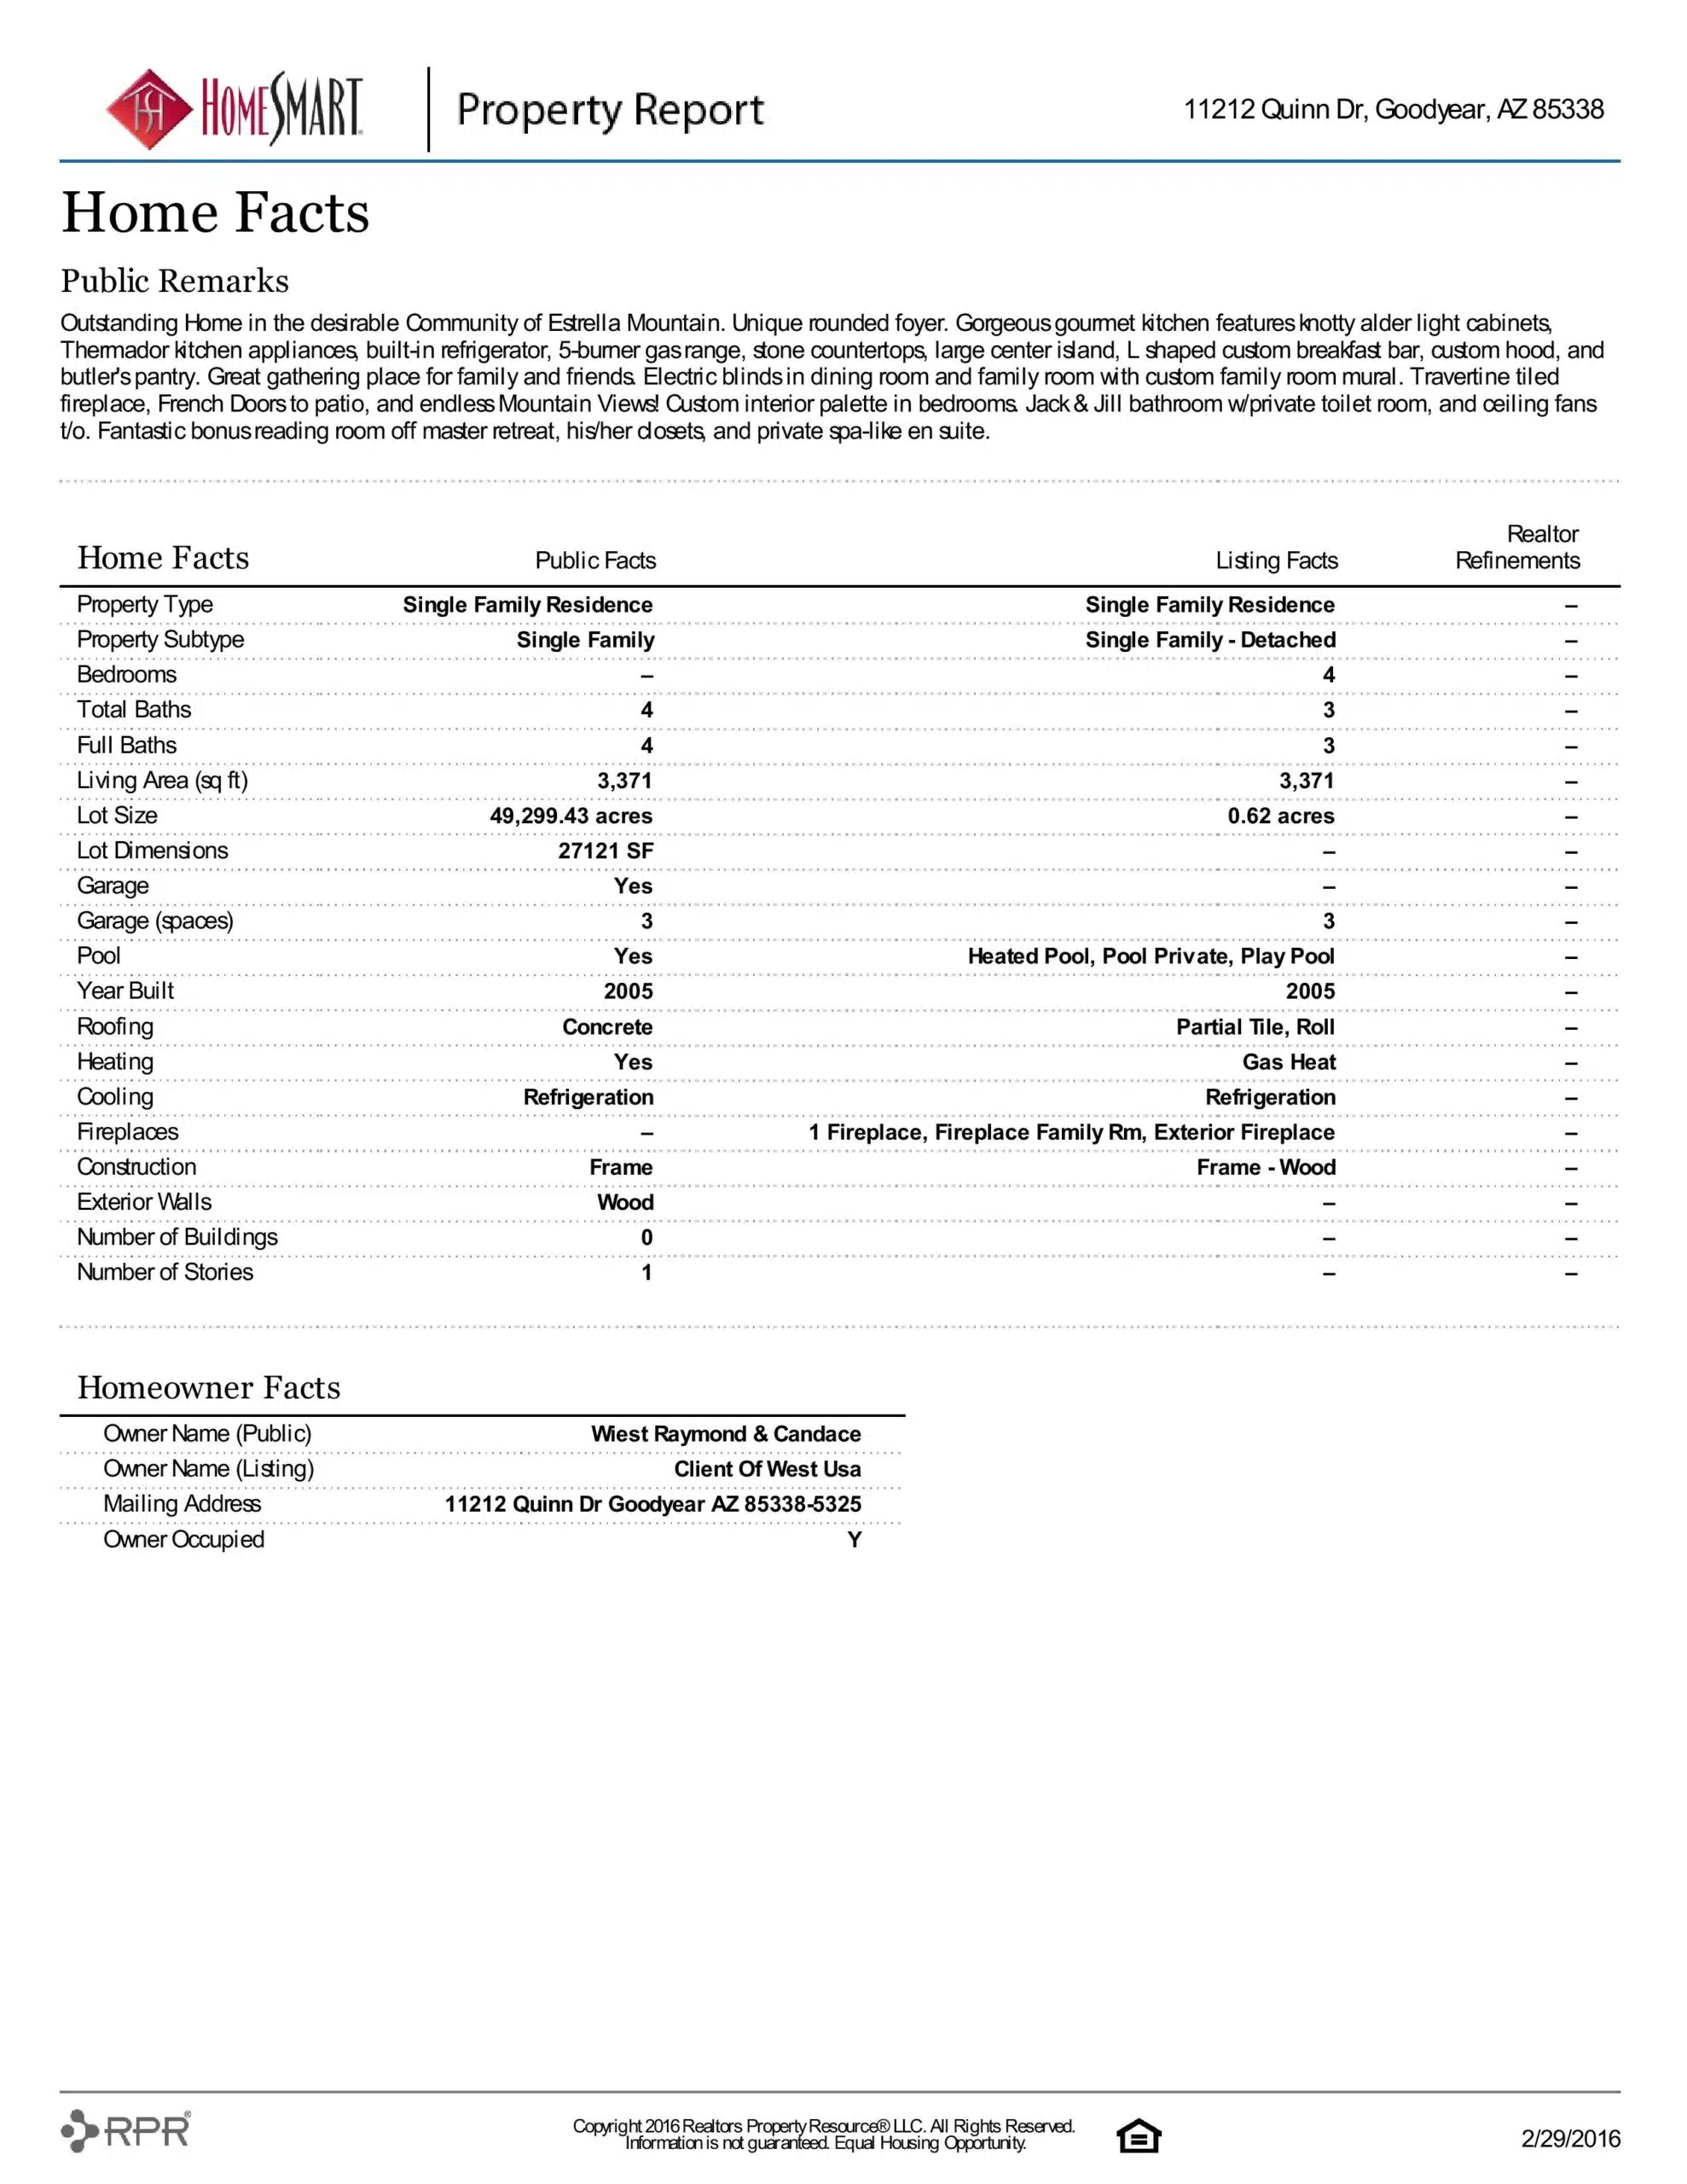 11212 S QUINN DR PROPERTY REPORT-page-003